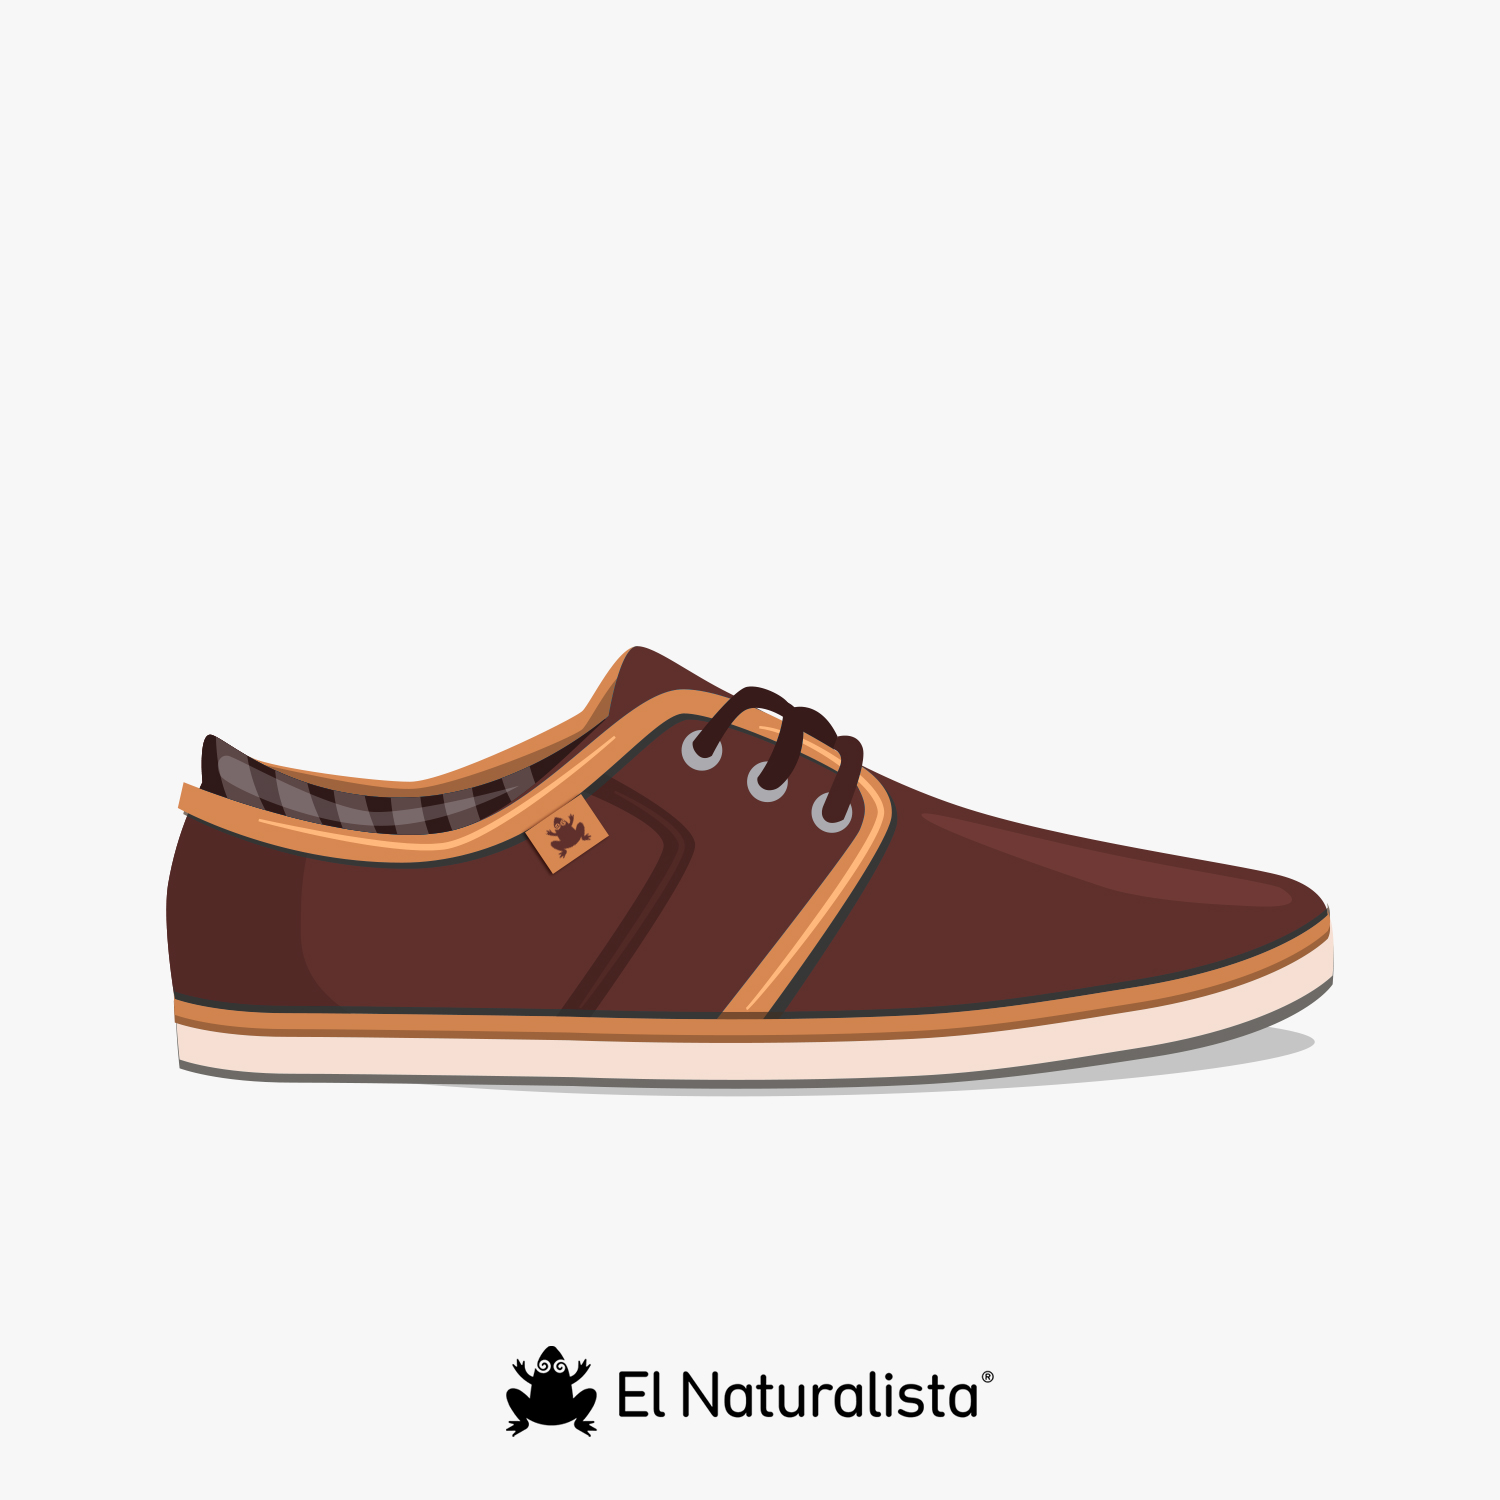 El Naturalista Chaussures Mary Jane noir style d\u00e9contract\u00e9 Chaussures Chaussures basses Chaussures Mary Jane 